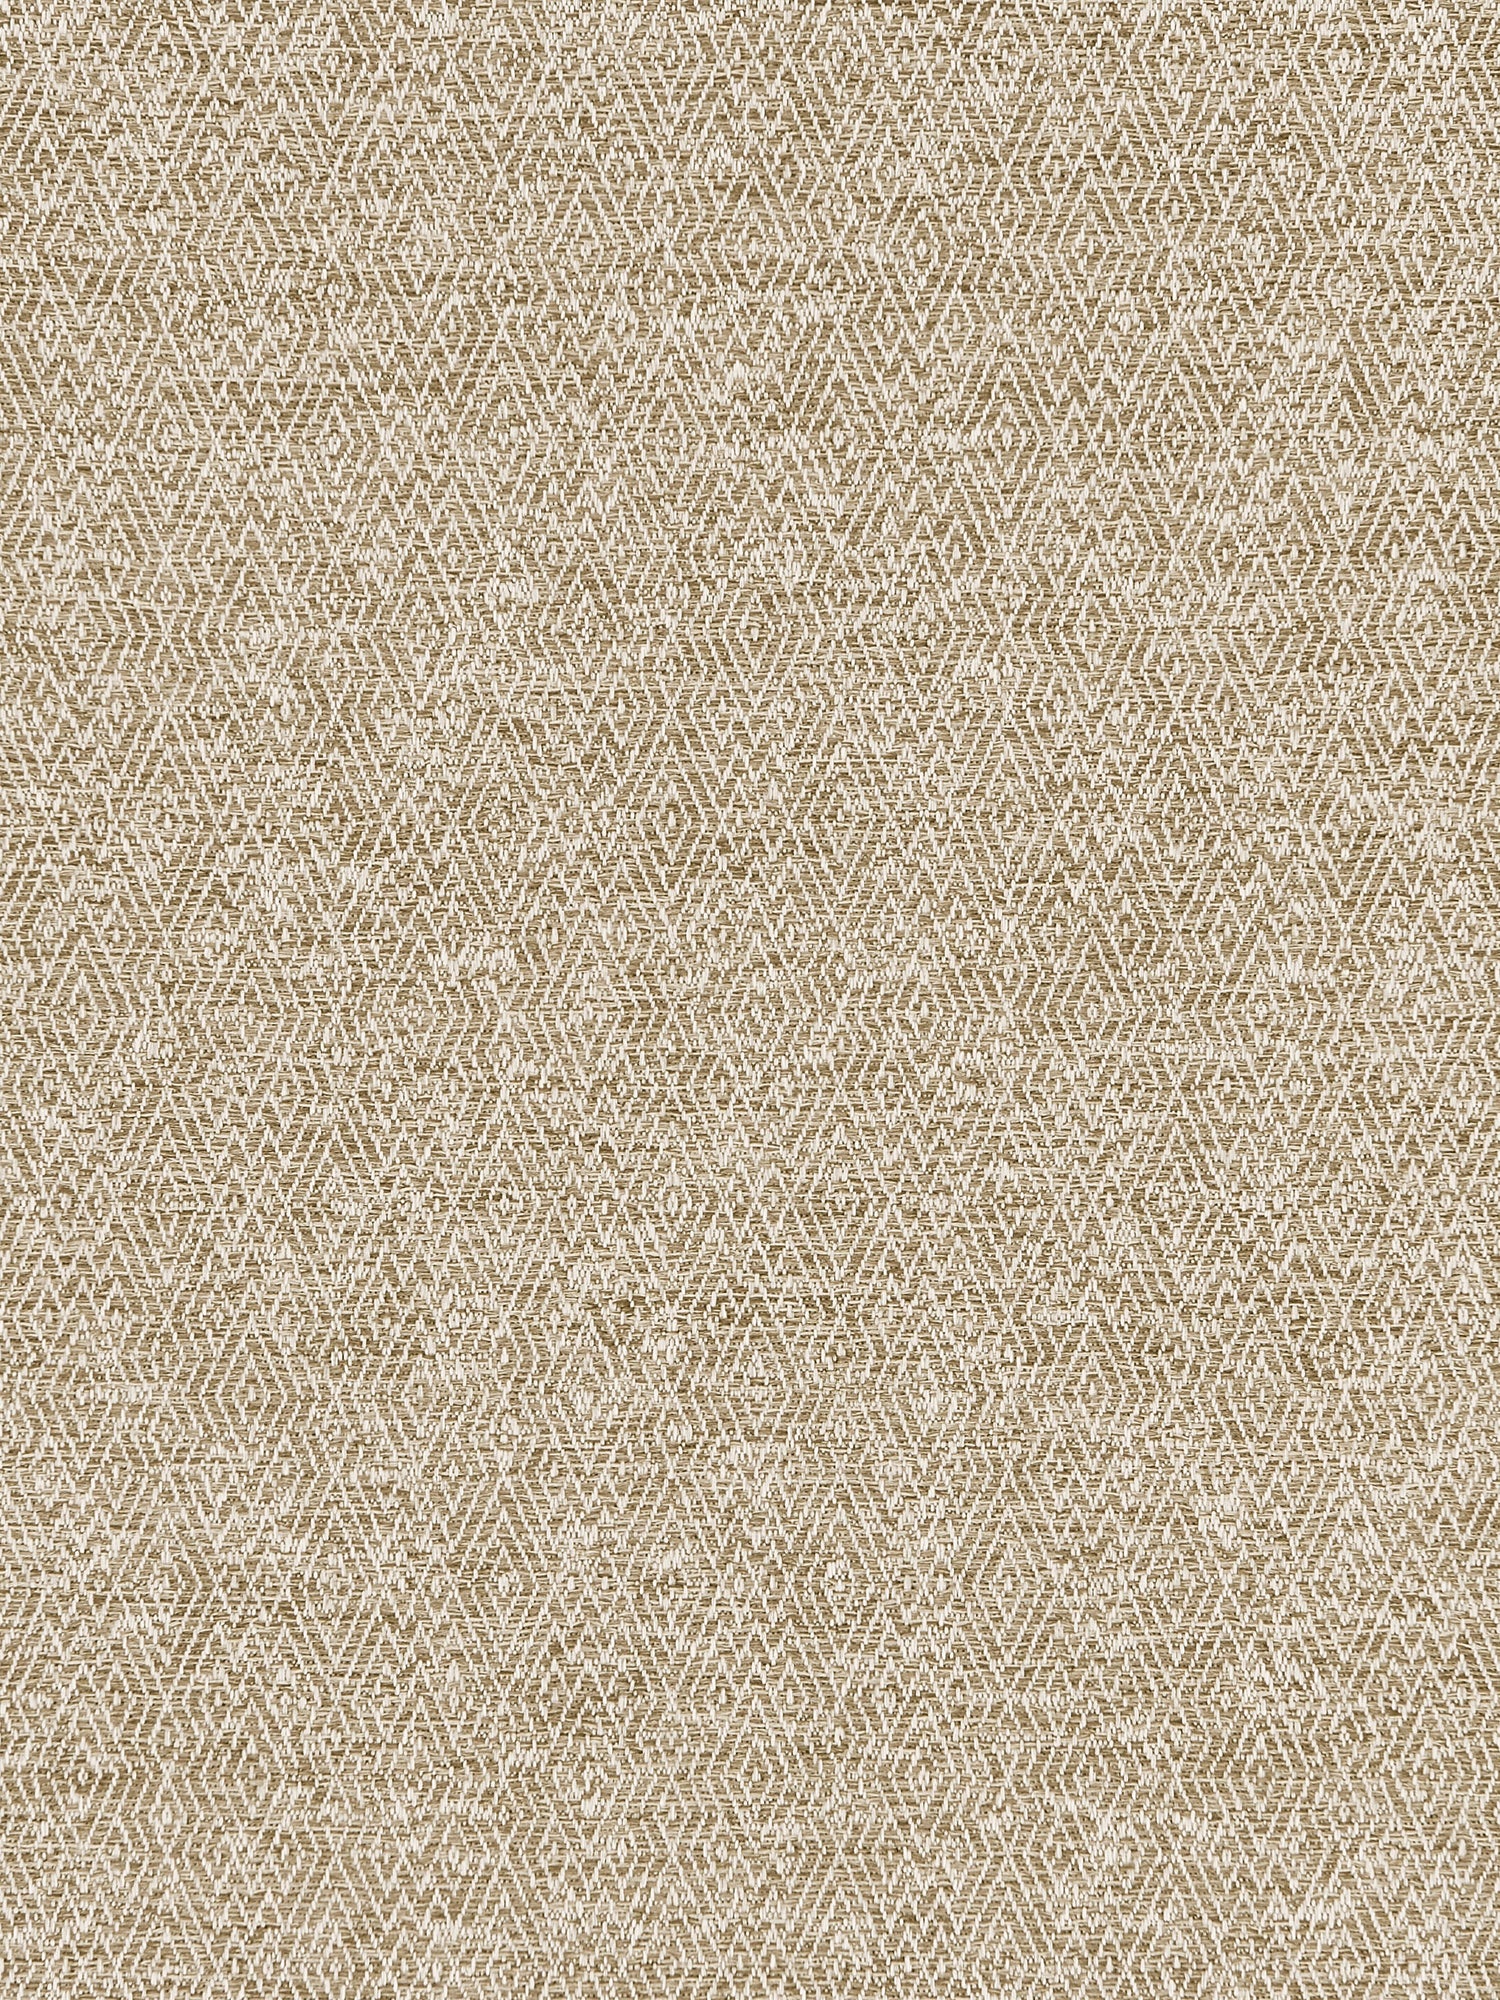 La Caleta fabric in driftwood color - pattern number NK 0090CALE - by Scalamandre in the Old World Weavers collection